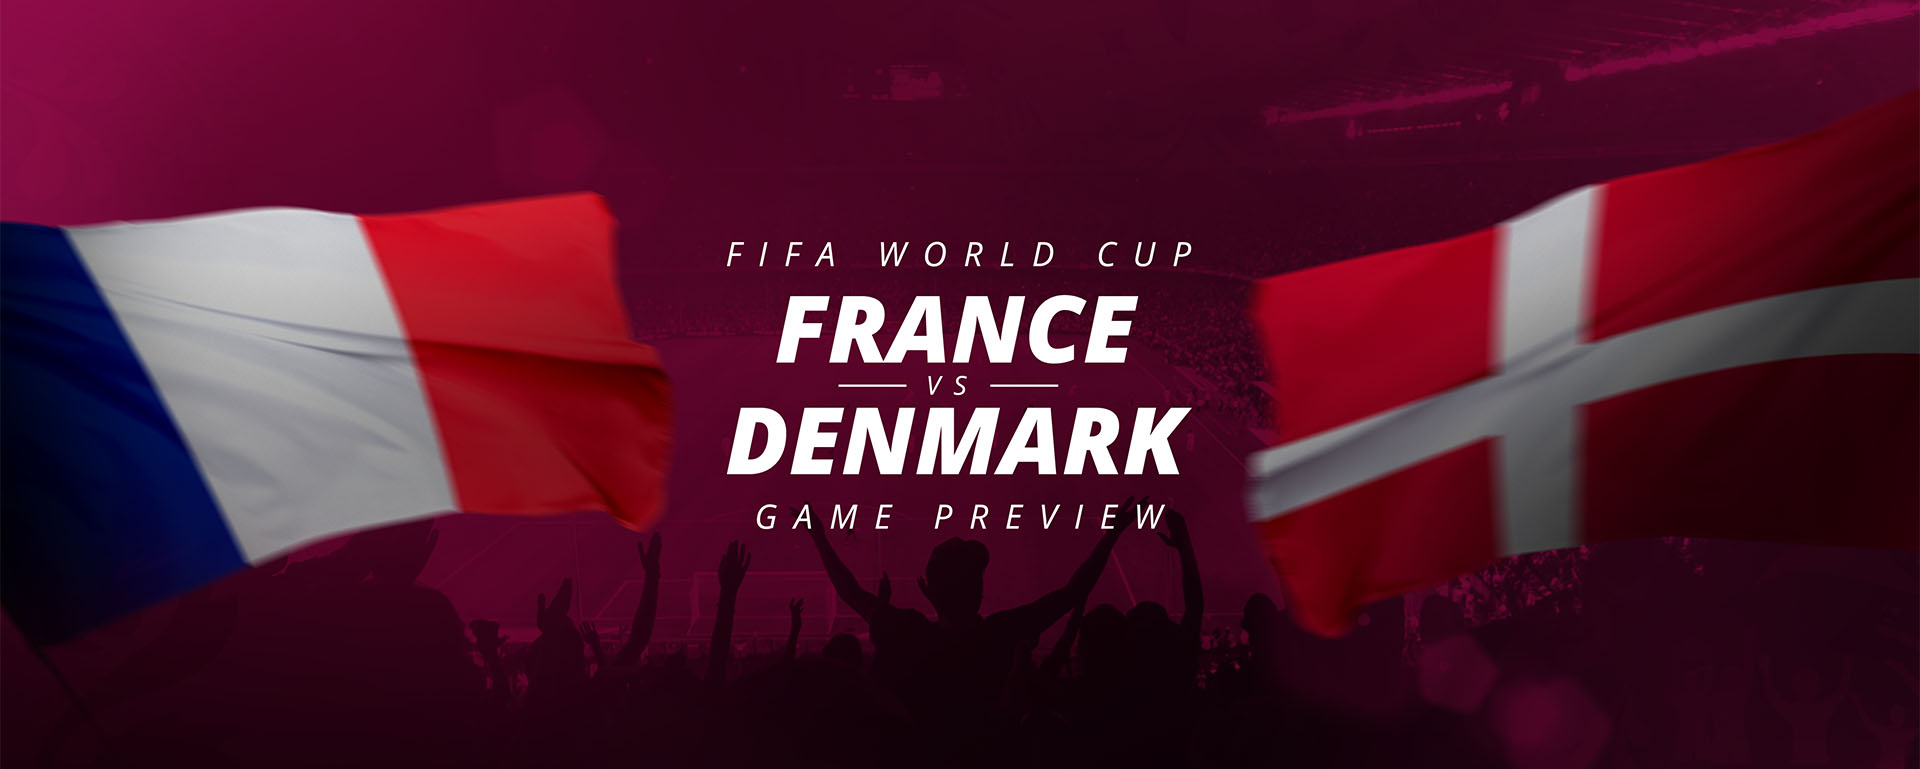 FIFA WORLD CUP: FRANCE V DENMARK – GAME PREVIEW